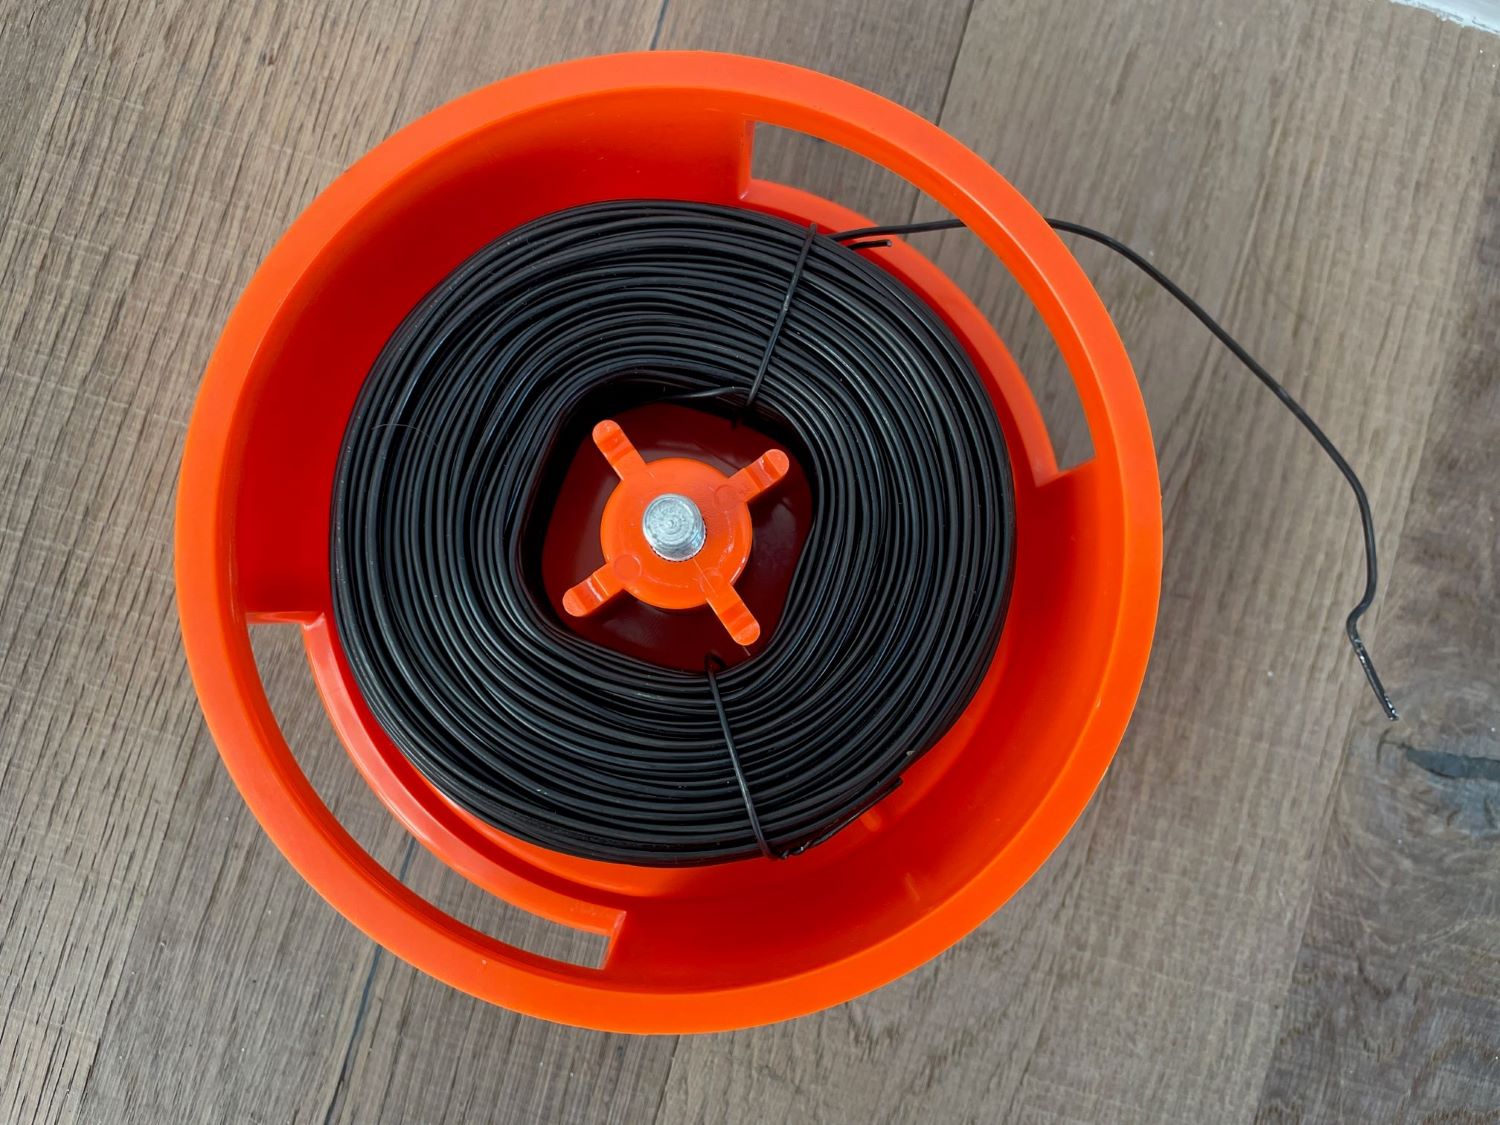 Plastic Rebar Tie Wire Reel - Lightweight - Holds 400 ft of Wire